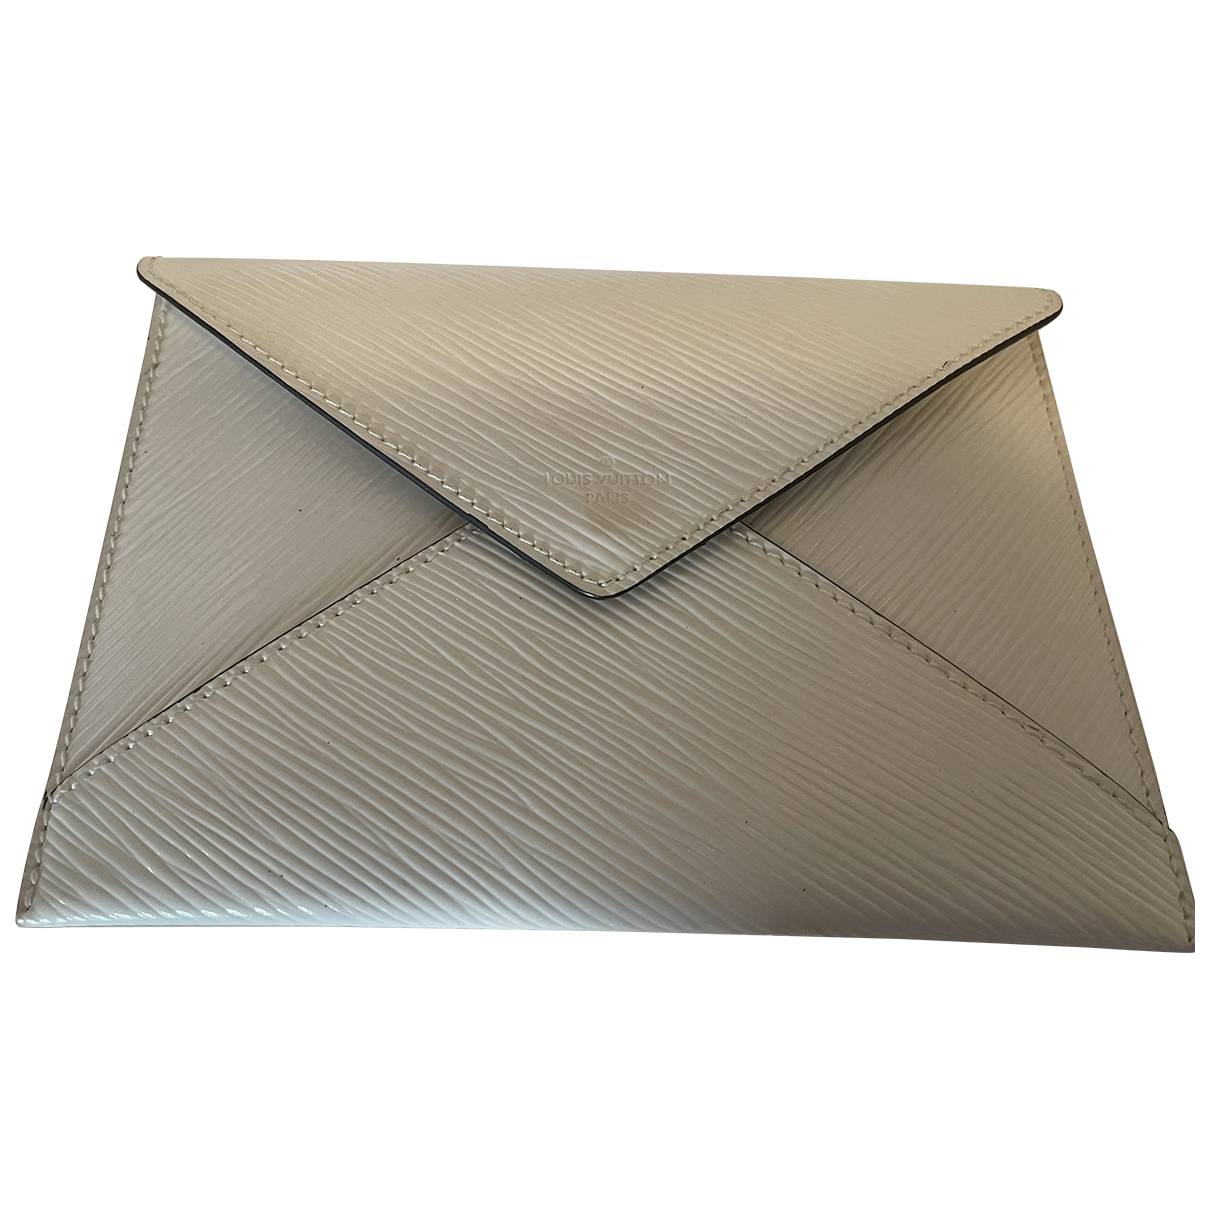 Leather clutch bag Louis Vuitton White in Leather - 31875294